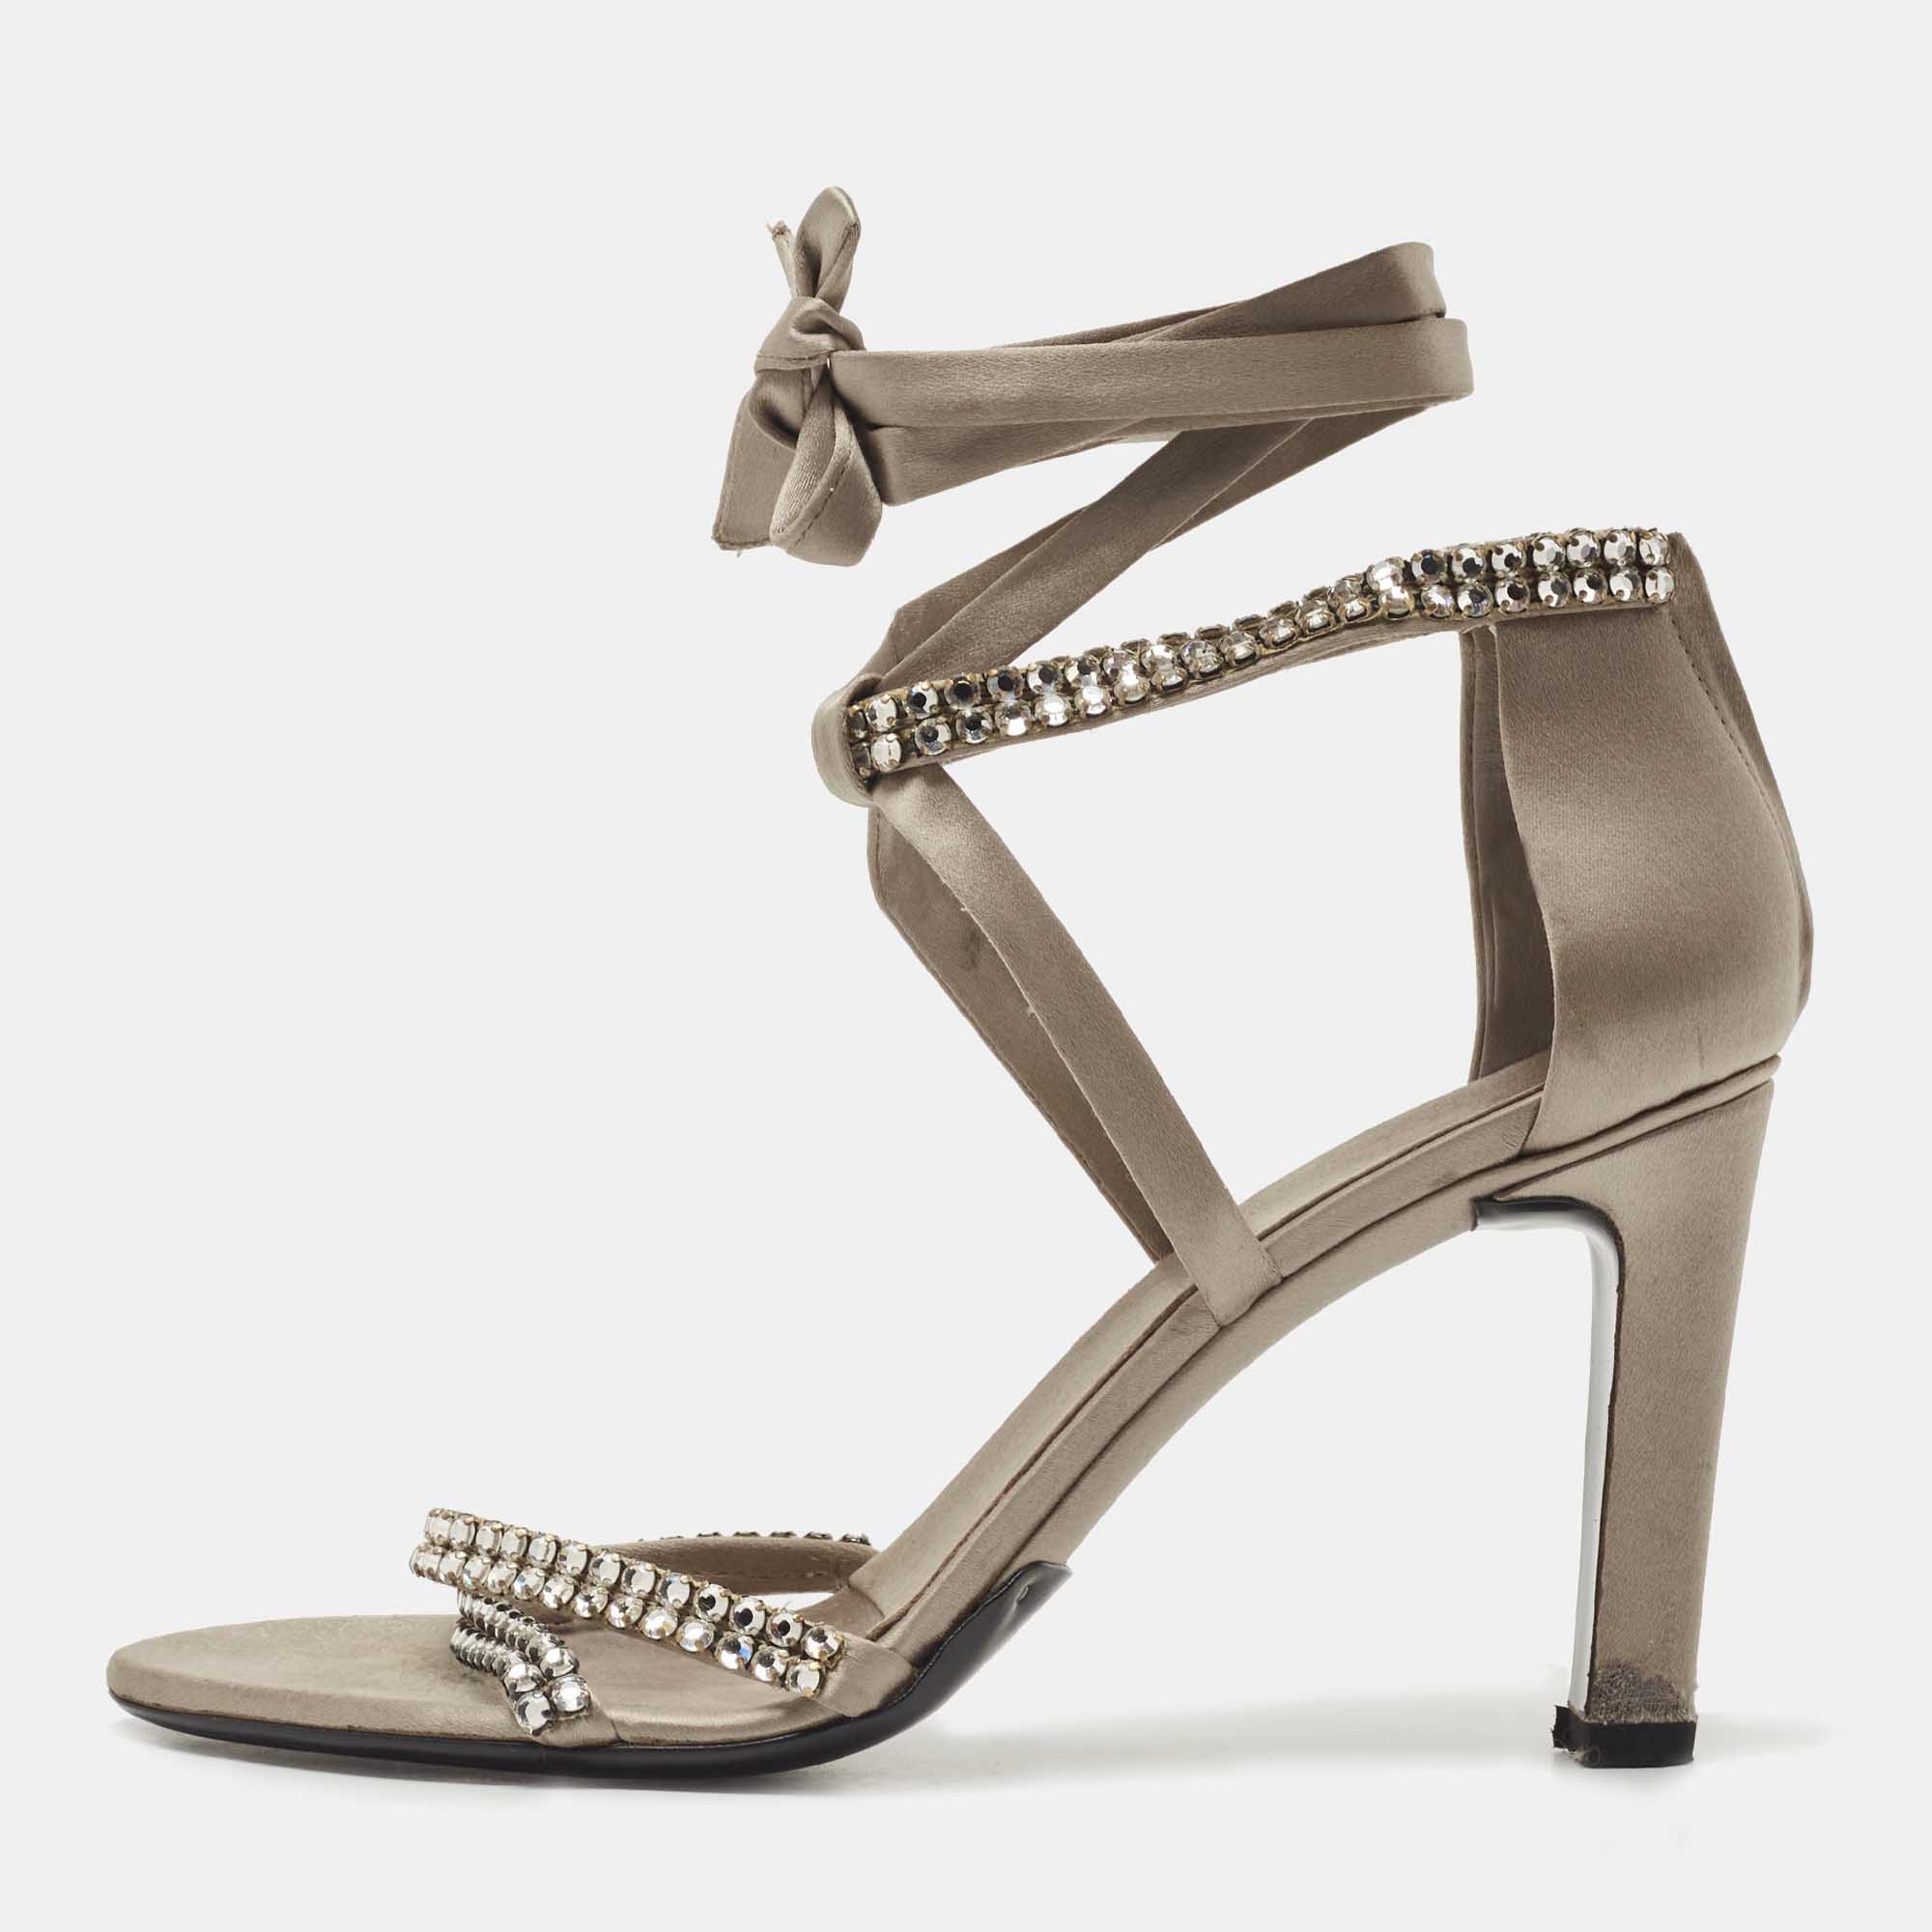 Pre-owned Gucci Grey Satin Crystal Embellished Ankle Wrap Sandals Size 37.5